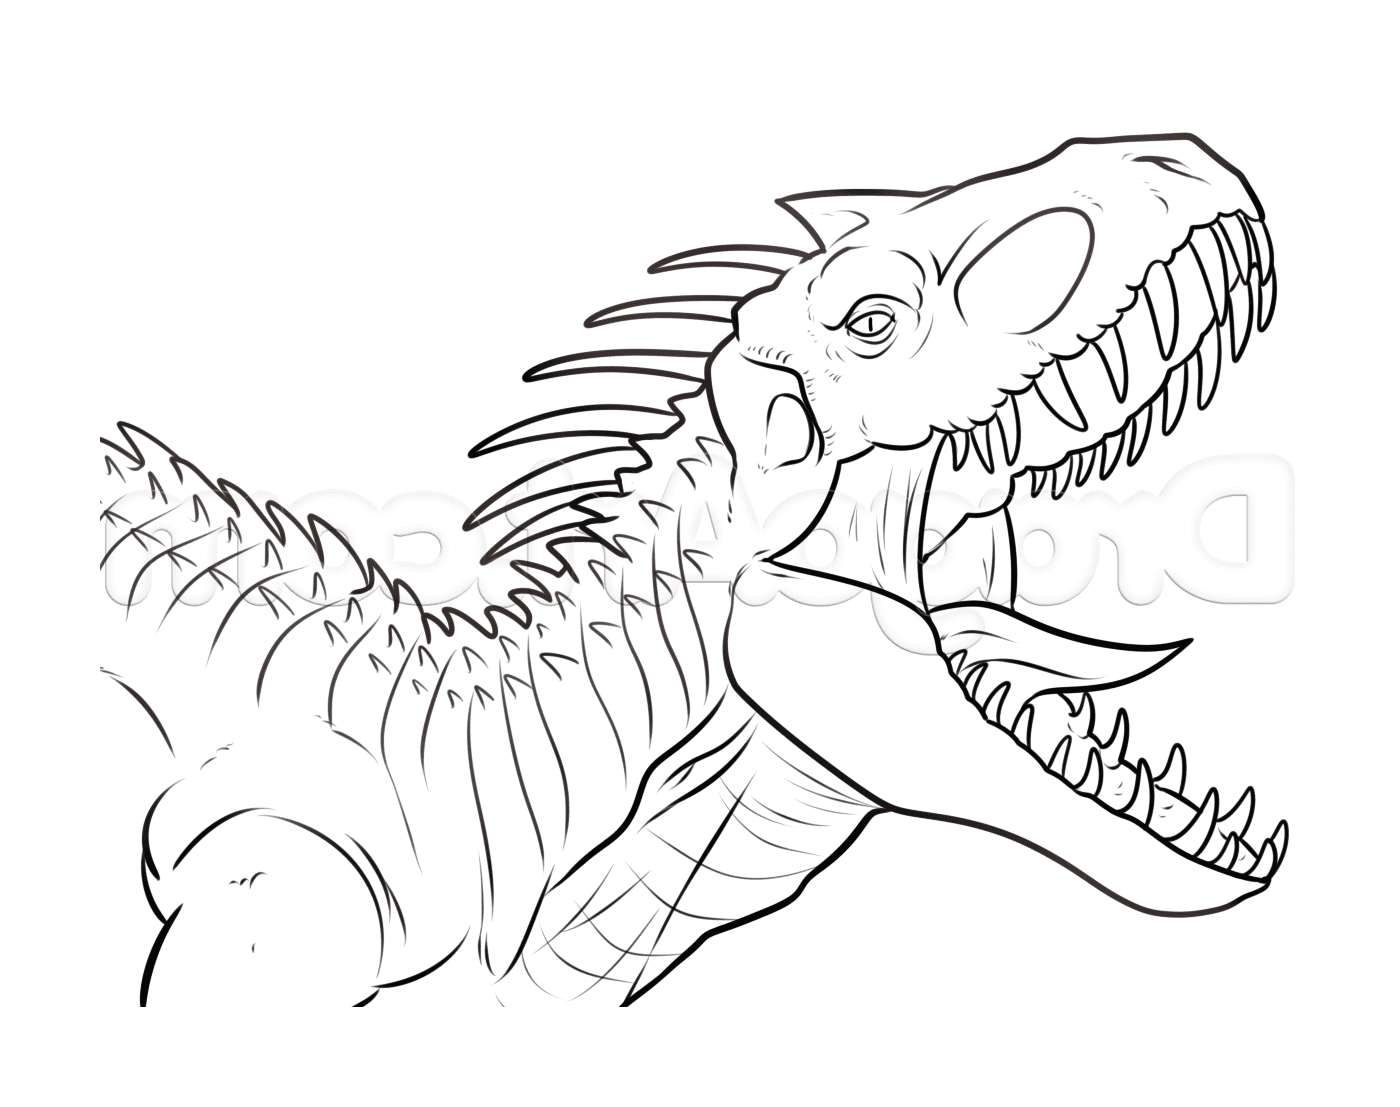  Indominus Rex scary from Jurassic Park 